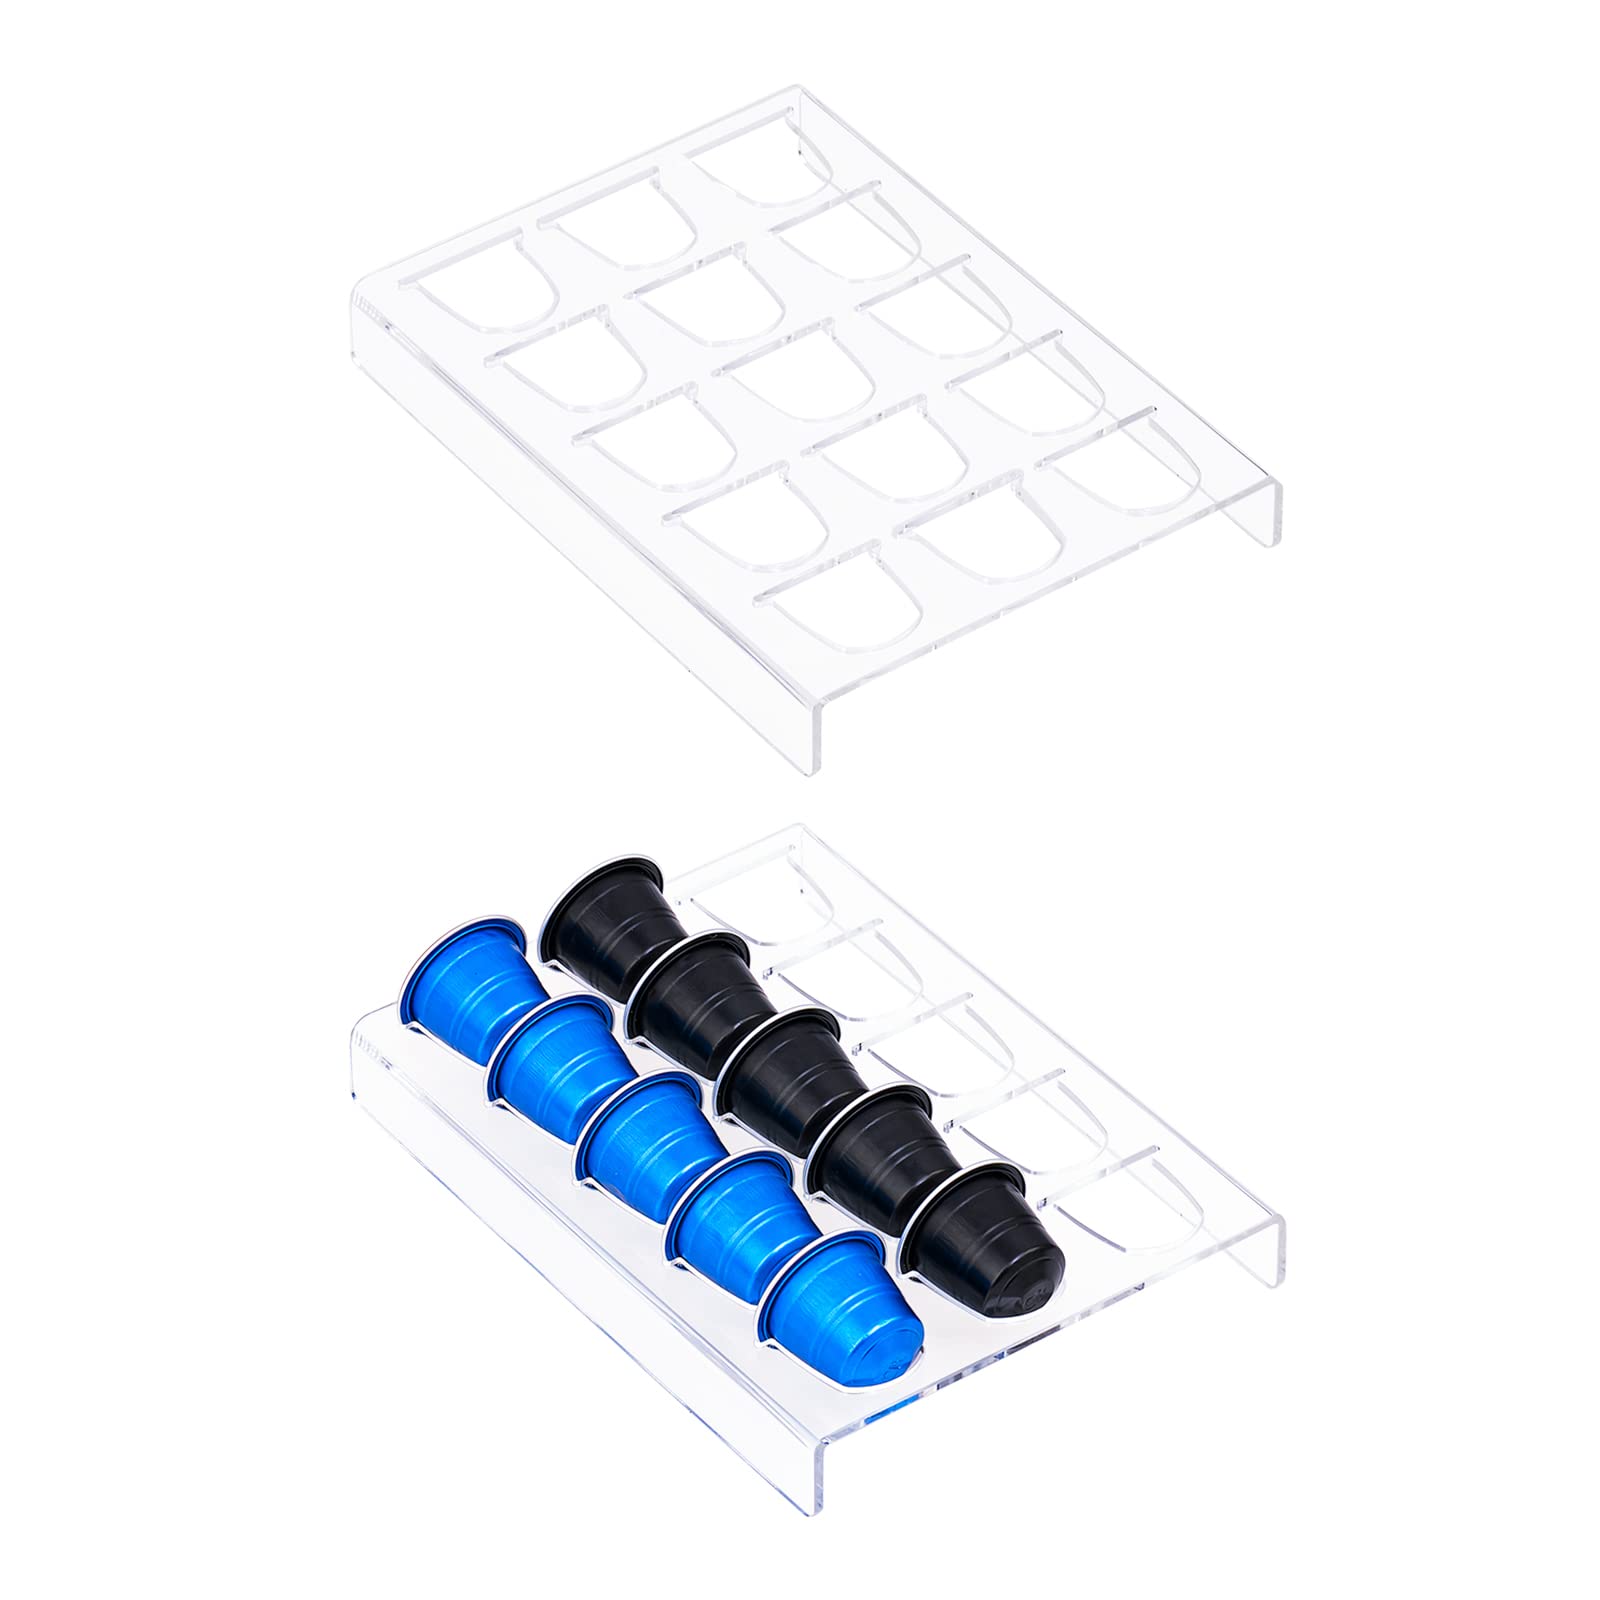 Sumerflos 2 Pack Acrylic Clear Coffee Pod Holder Organizer Tray, Coffee Pod Organizer for 15 OriginalLine Pods, Countertop or In Drawer Storage for Office, Home or Kitchen - 30 Pods